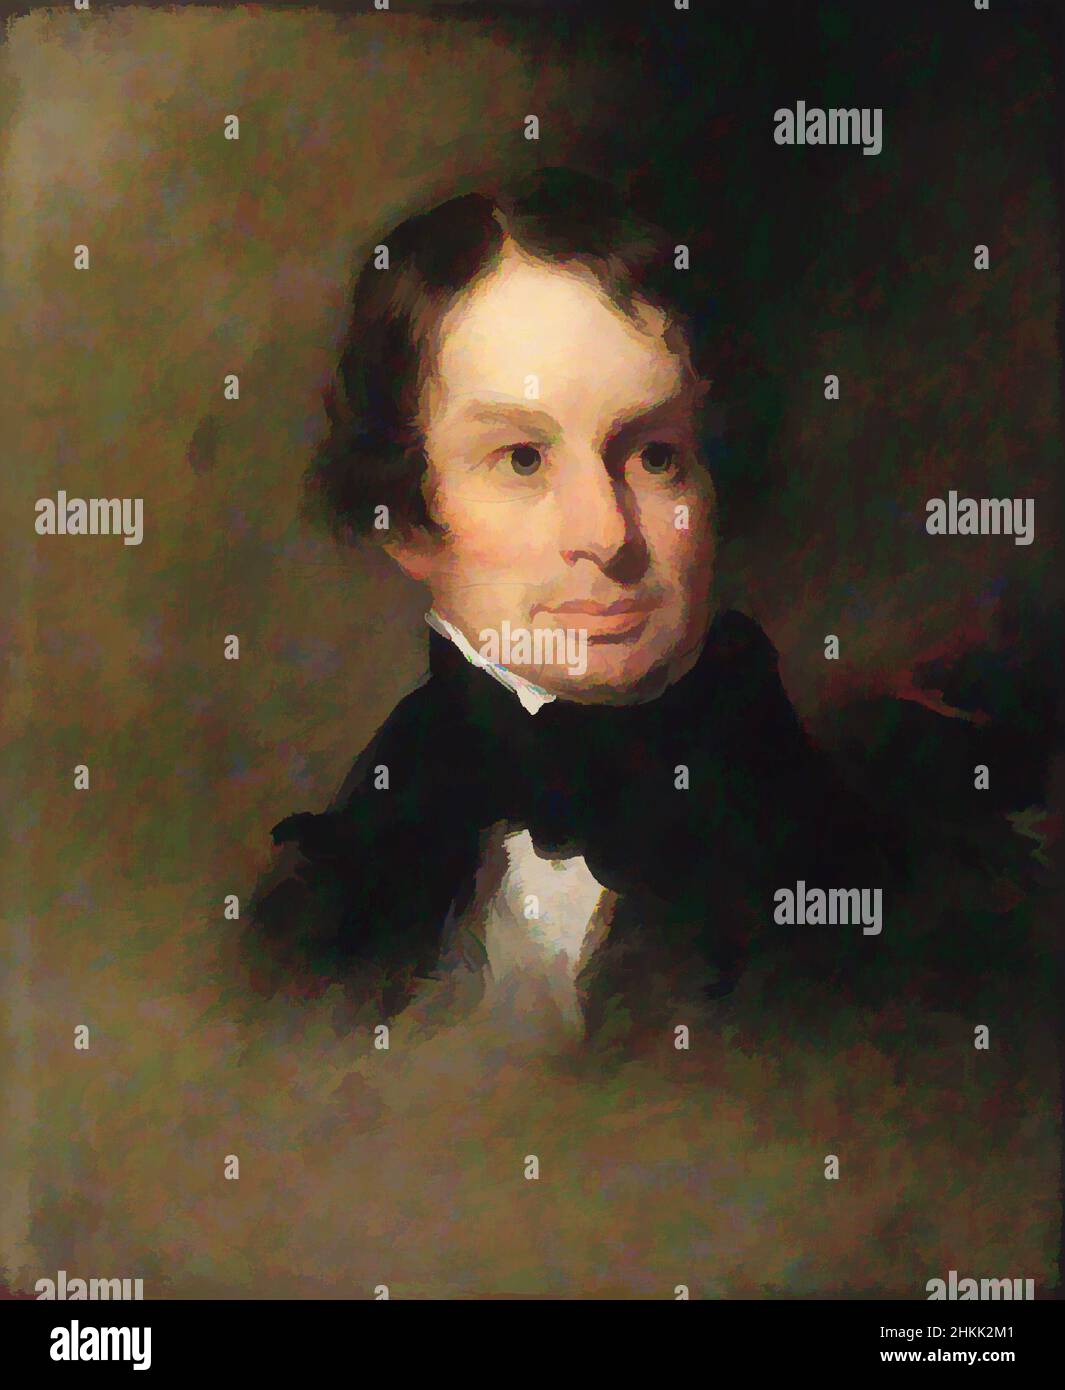 Art inspired by Henry Wadsworth Longfellow, Charles Loring Elliott, American, 1812-1868, Oil on canvas, ca. 1842-1846, 23 3/4 x 19 11/16 in., 60.4 x 50 cm, complicated collar, longfellow, man, misty, painting, portrait, smile, staring, Classic works modernized by Artotop with a splash of modernity. Shapes, color and value, eye-catching visual impact on art. Emotions through freedom of artworks in a contemporary way. A timeless message pursuing a wildly creative new direction. Artists turning to the digital medium and creating the Artotop NFT Stock Photo